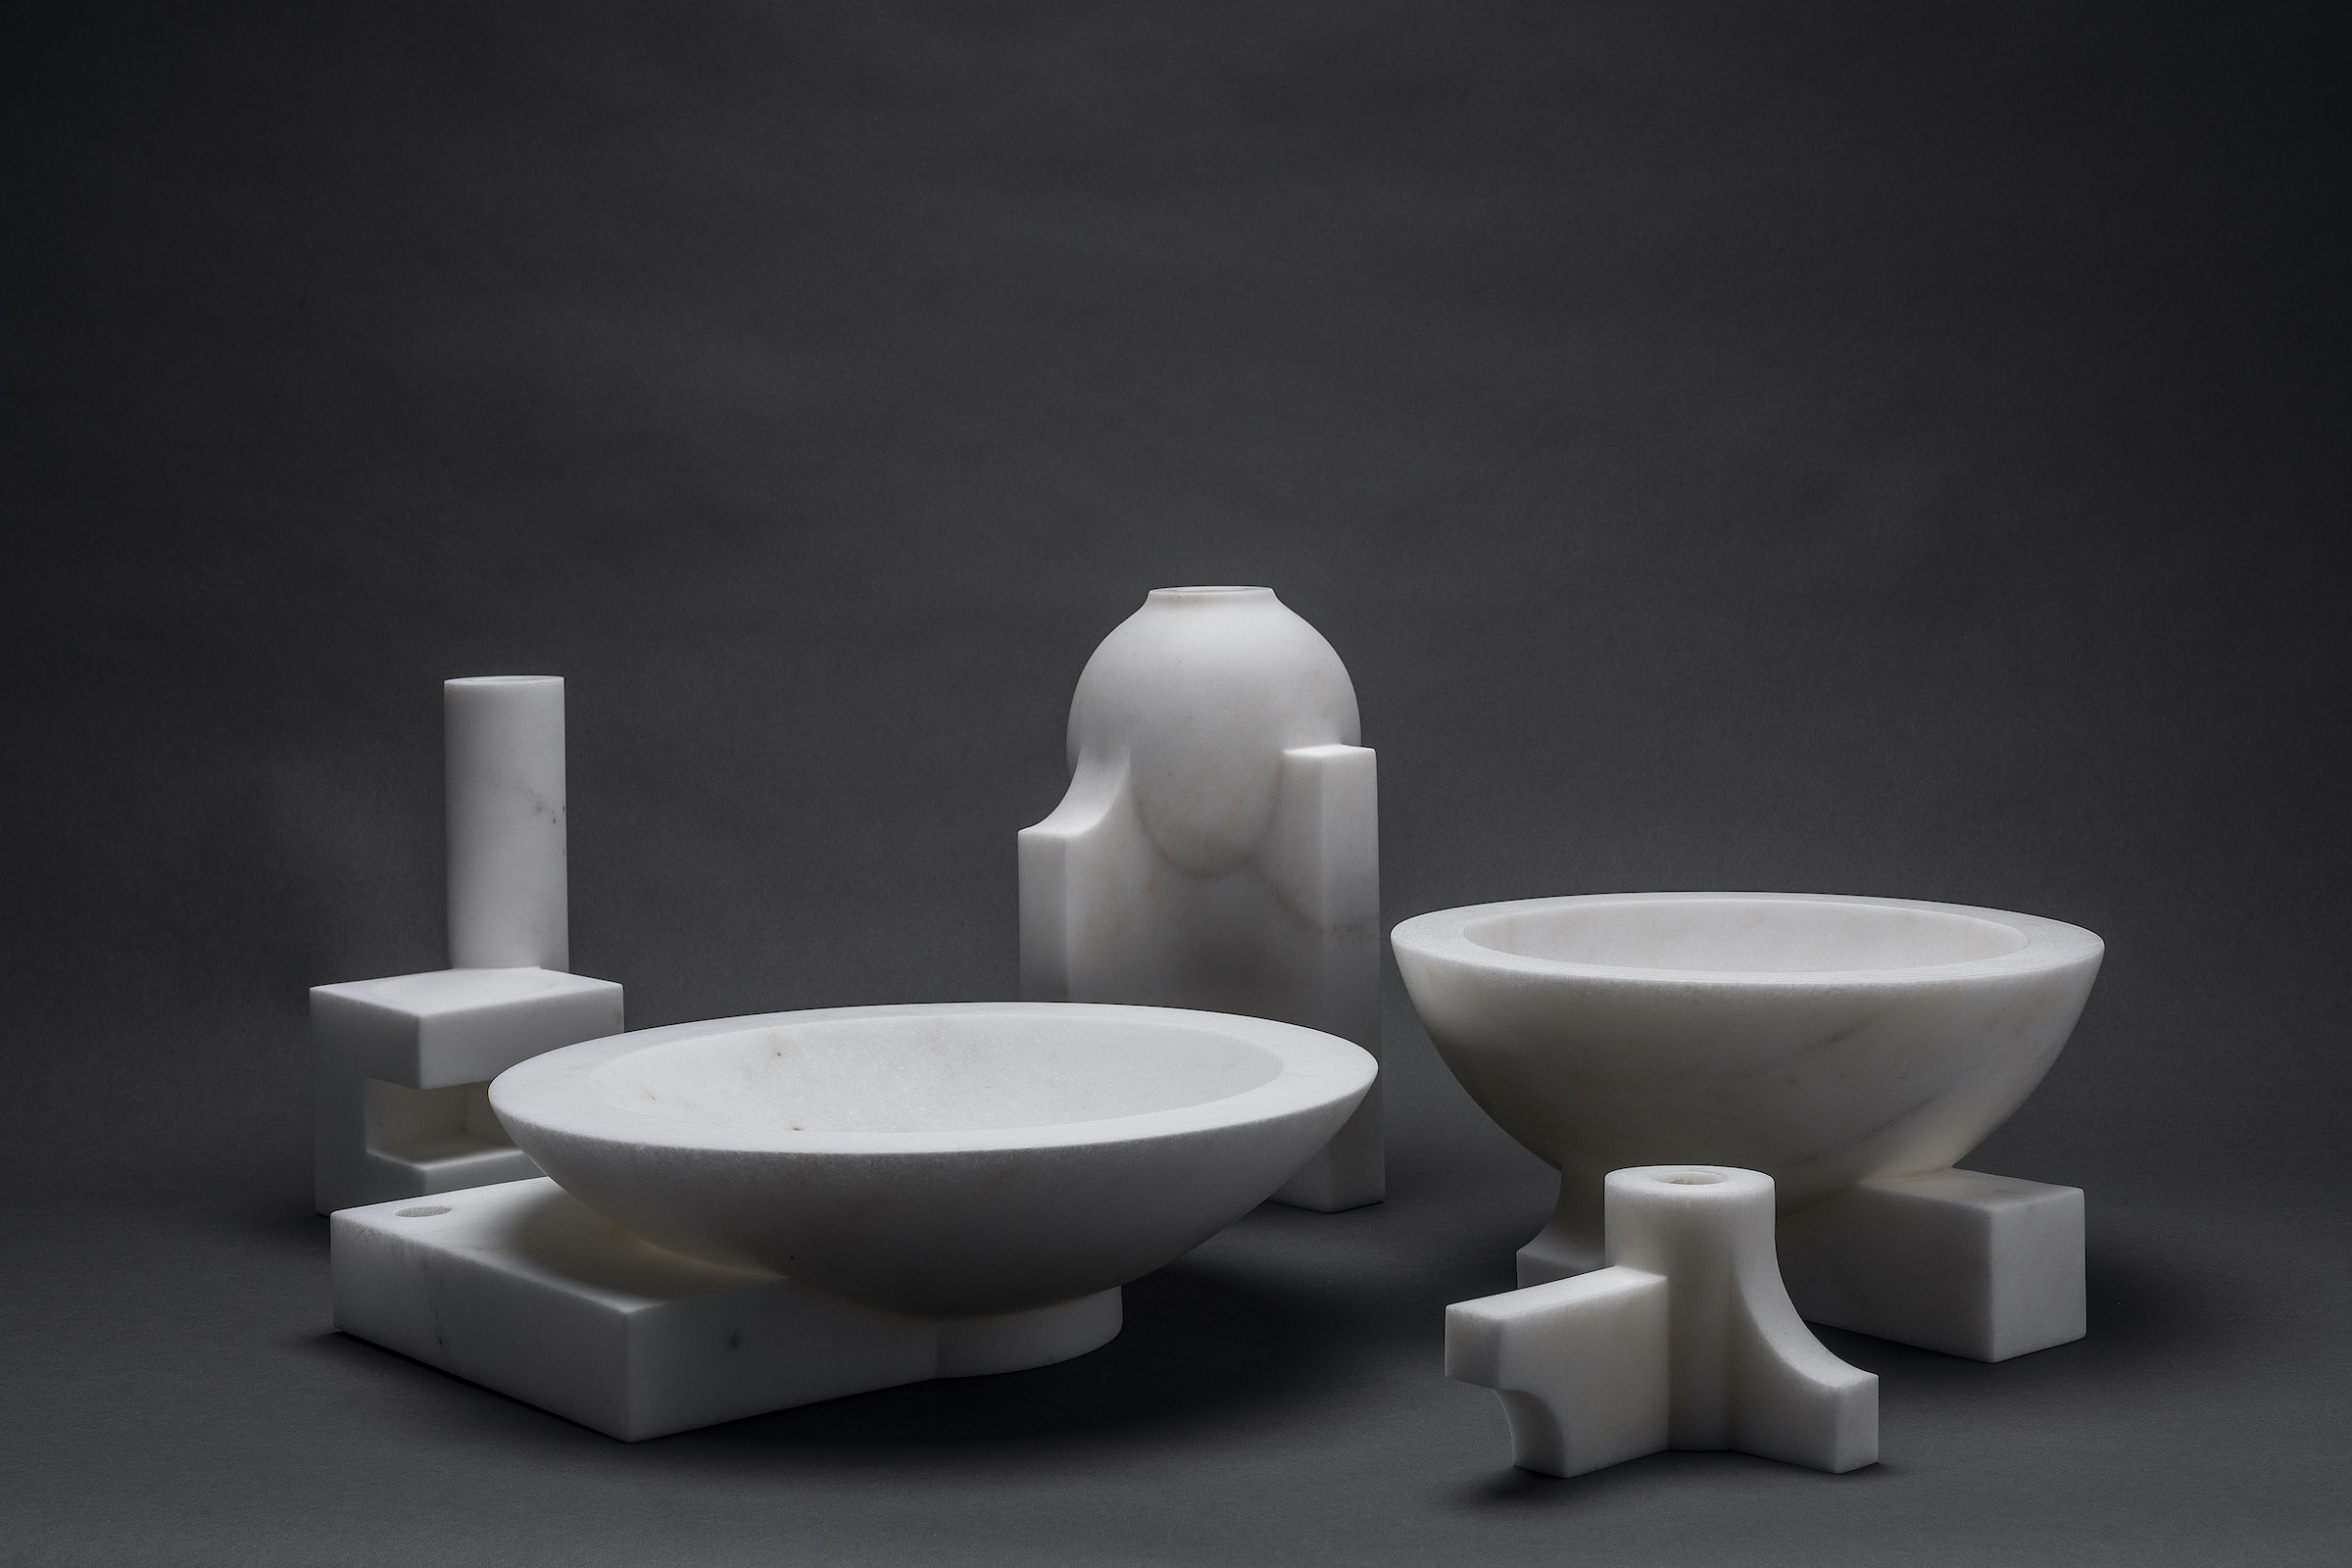 Galeana Collection by Jorge Diego Etienne